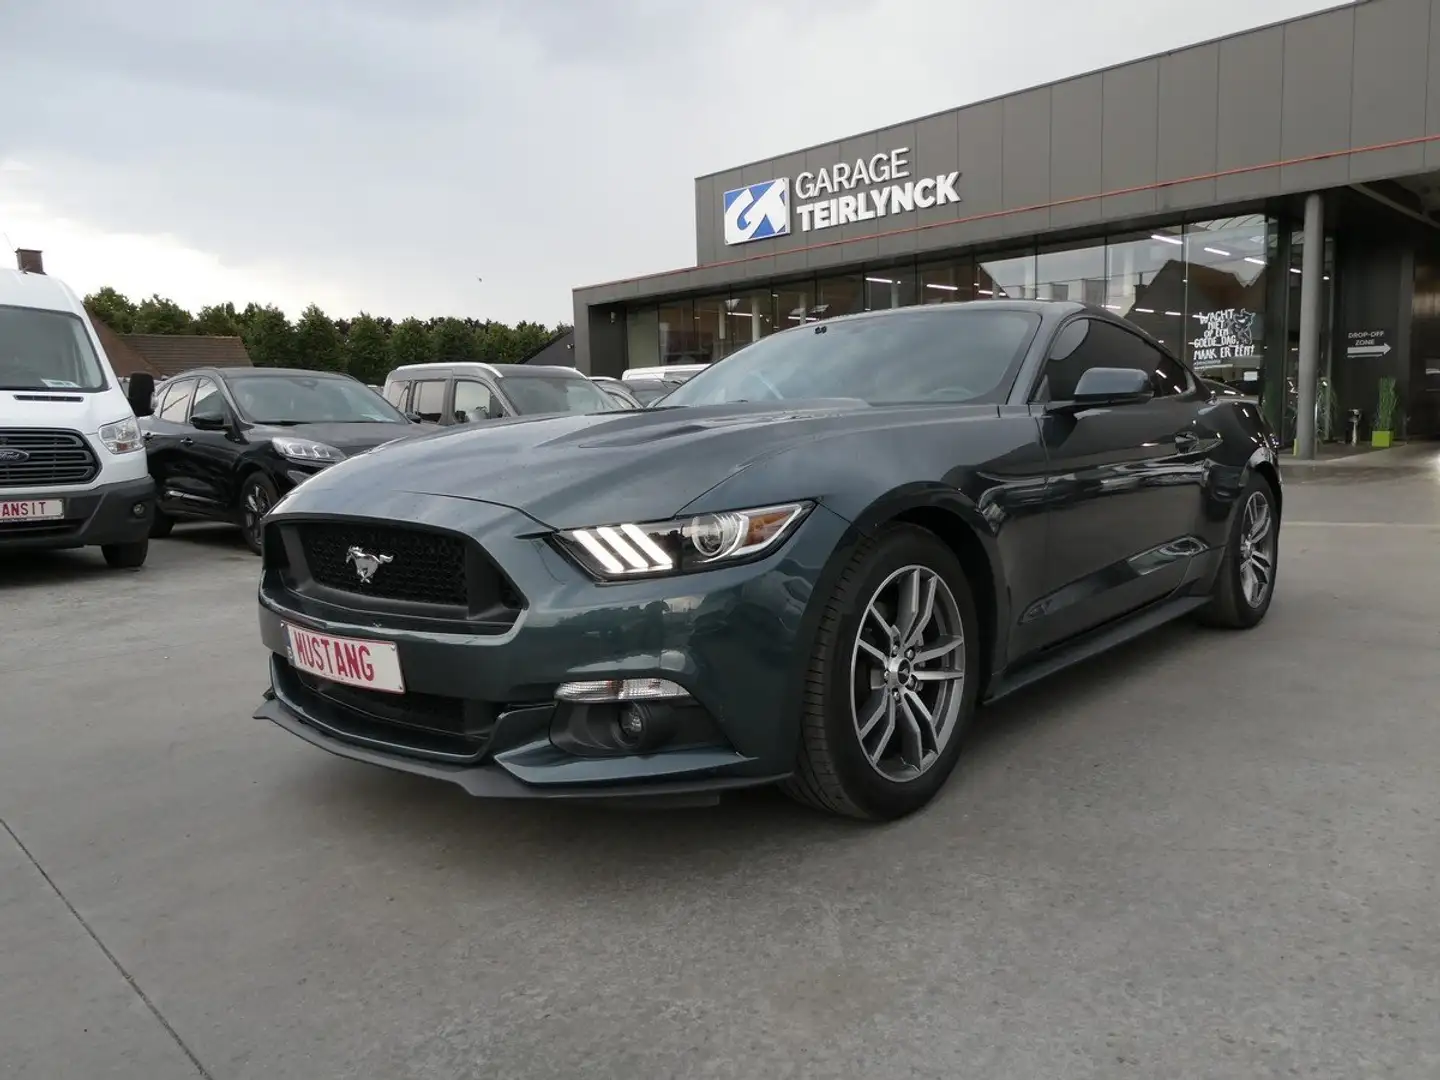 Ford Mustang Coupe Automaat 2.3 i 317pk '15 33000km (48593) Verde - 1